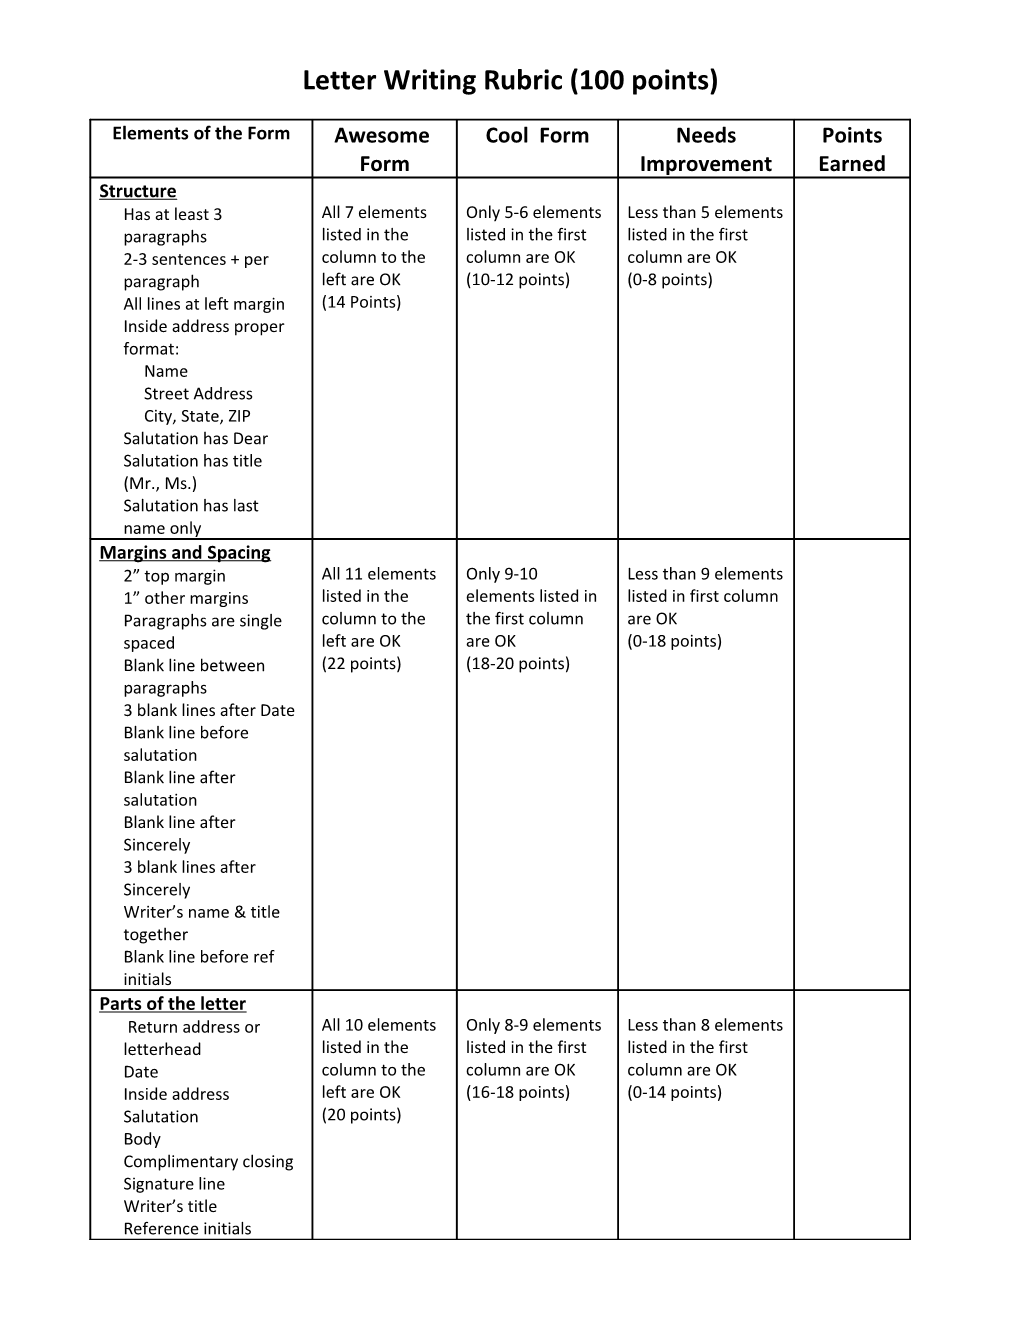 Letter Writing Rubric (100 Points)